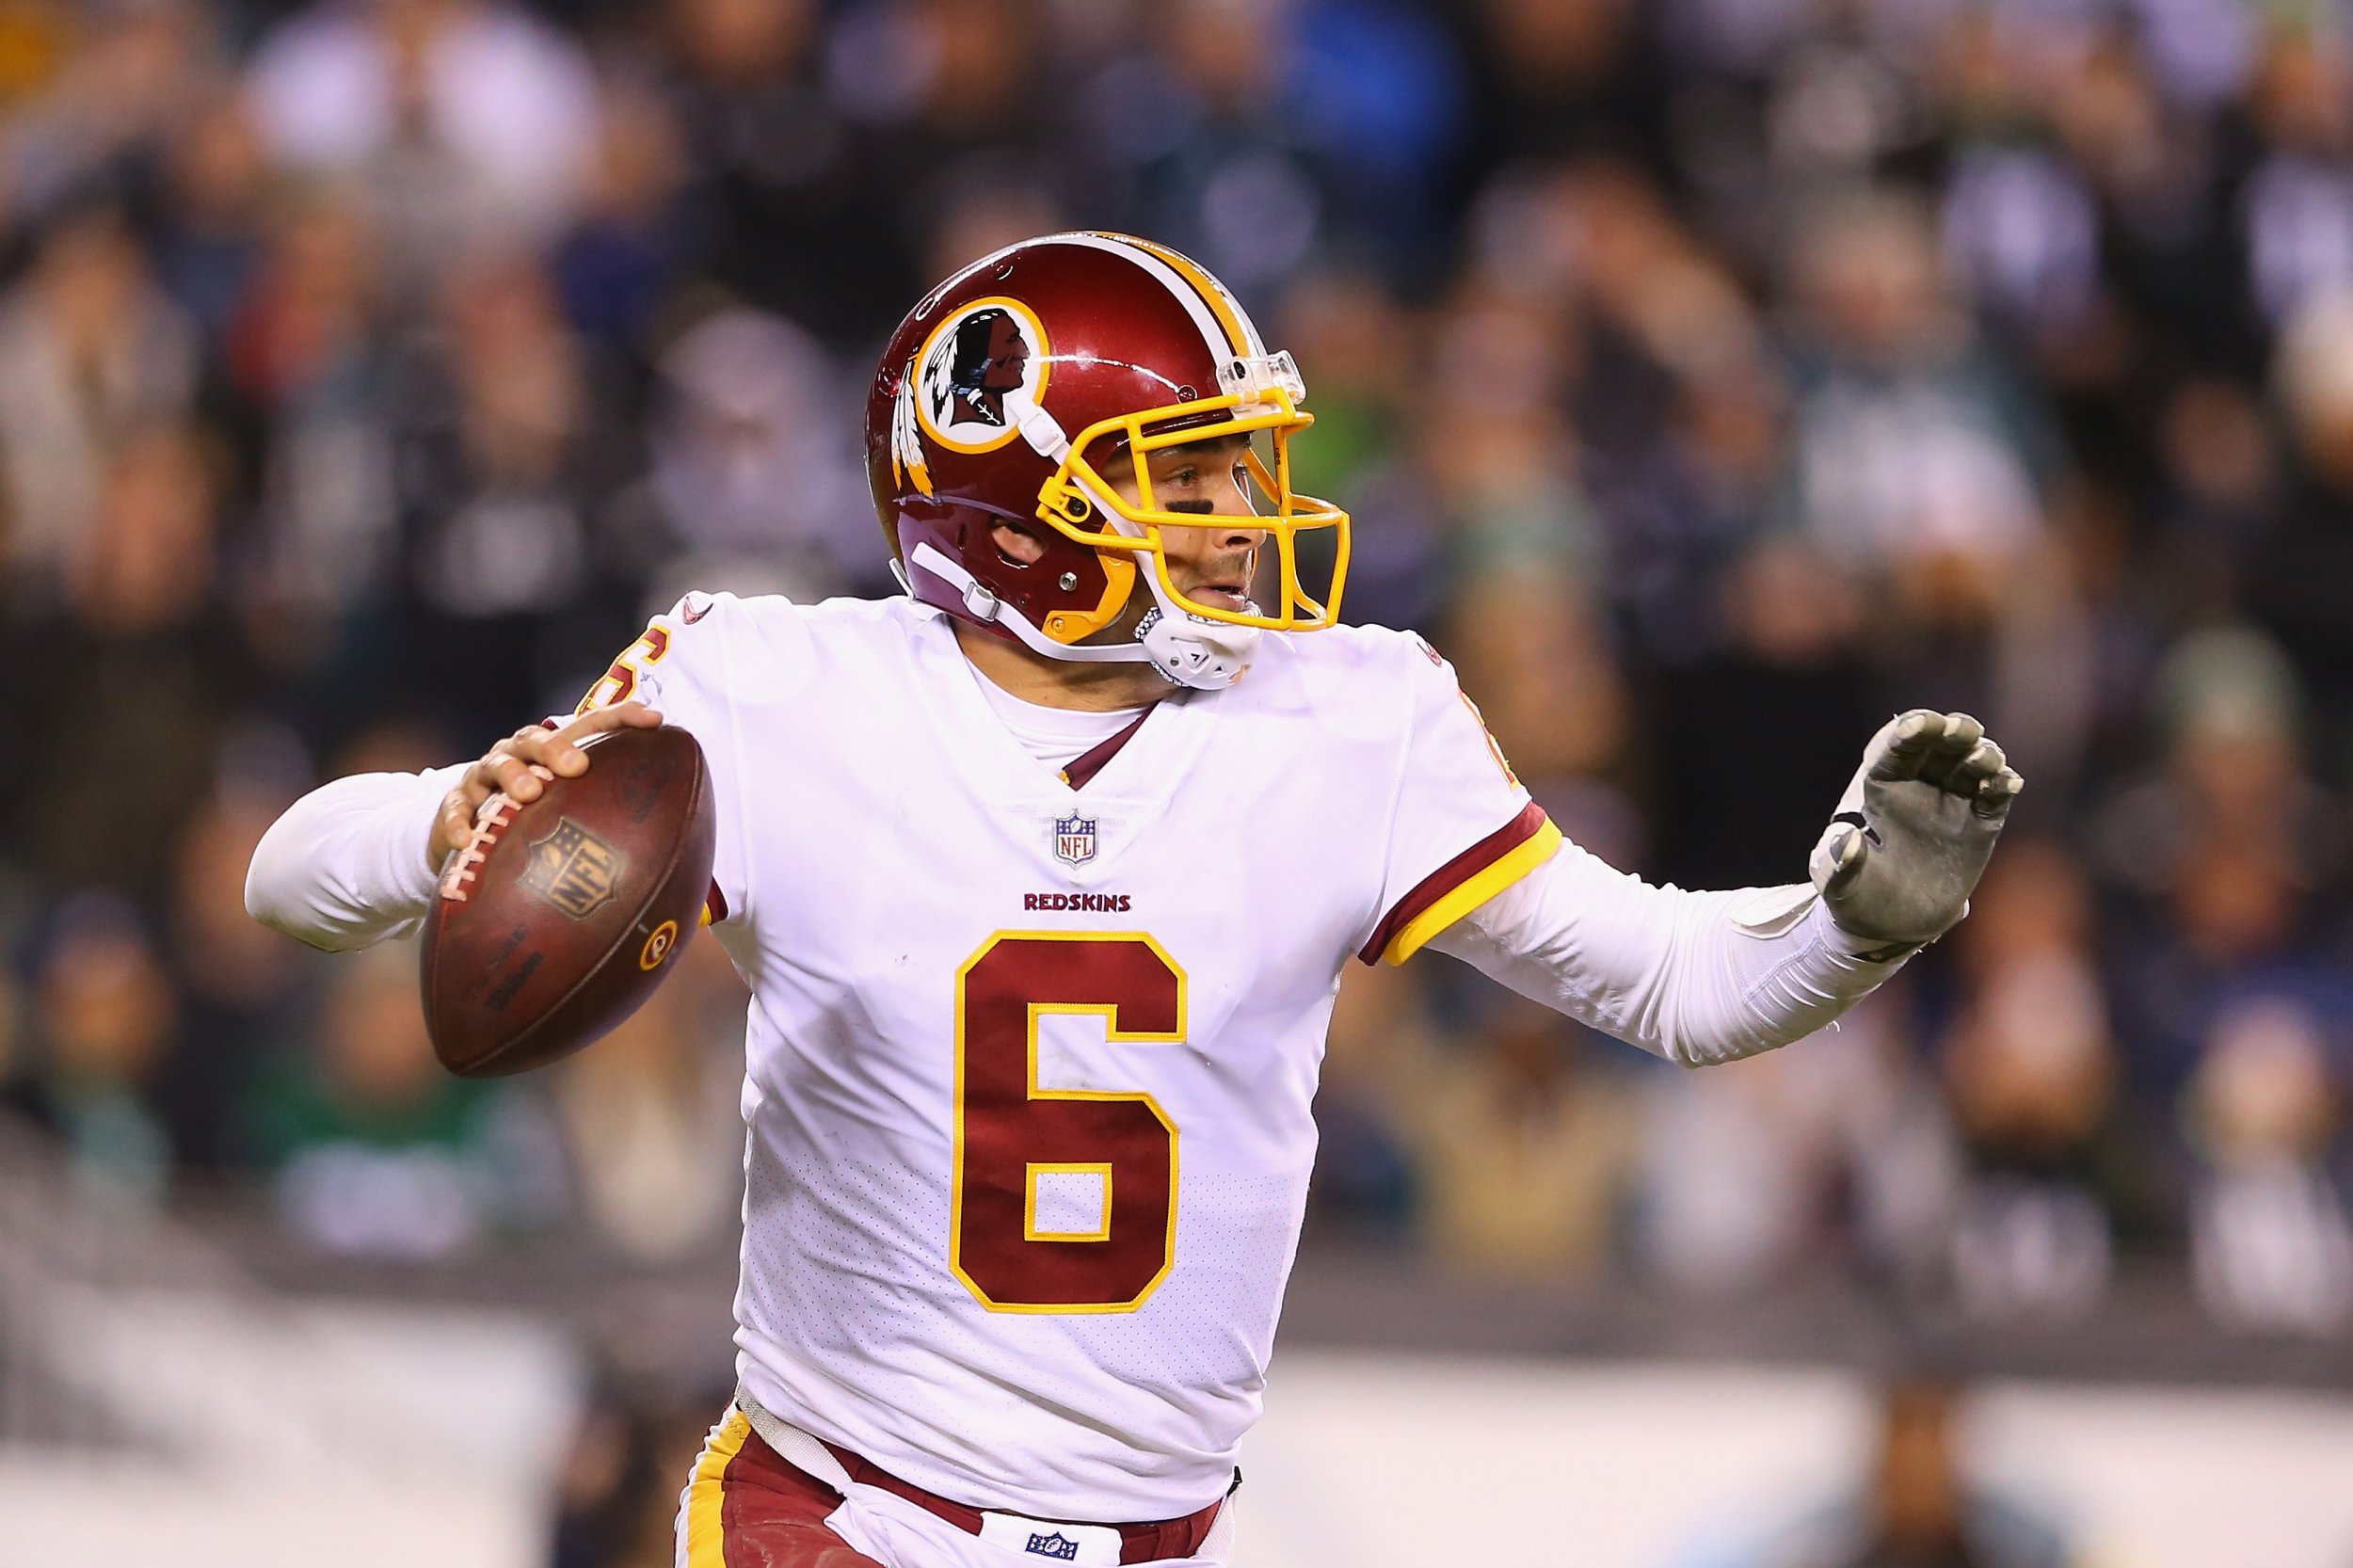 Who Will Be the Washington Redskins' Next QB after Colt McCoy's Injury?